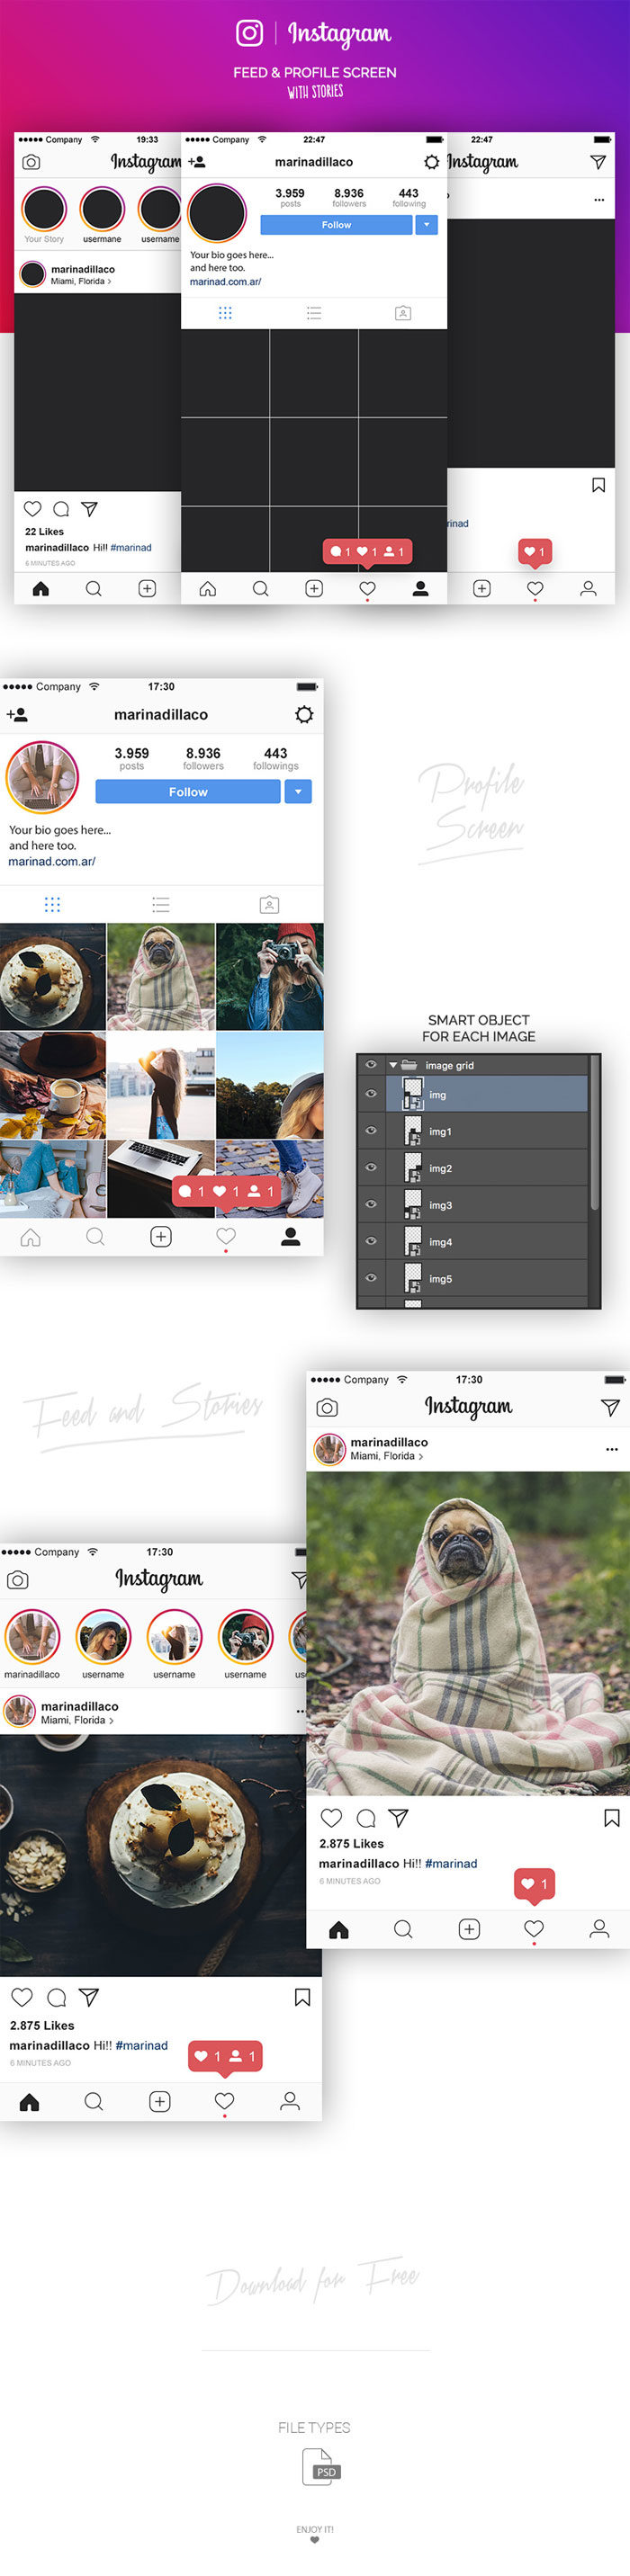 preview-instagram-2017-psd-700x2864 Check out these FREE Instagram Mockup Templates to download